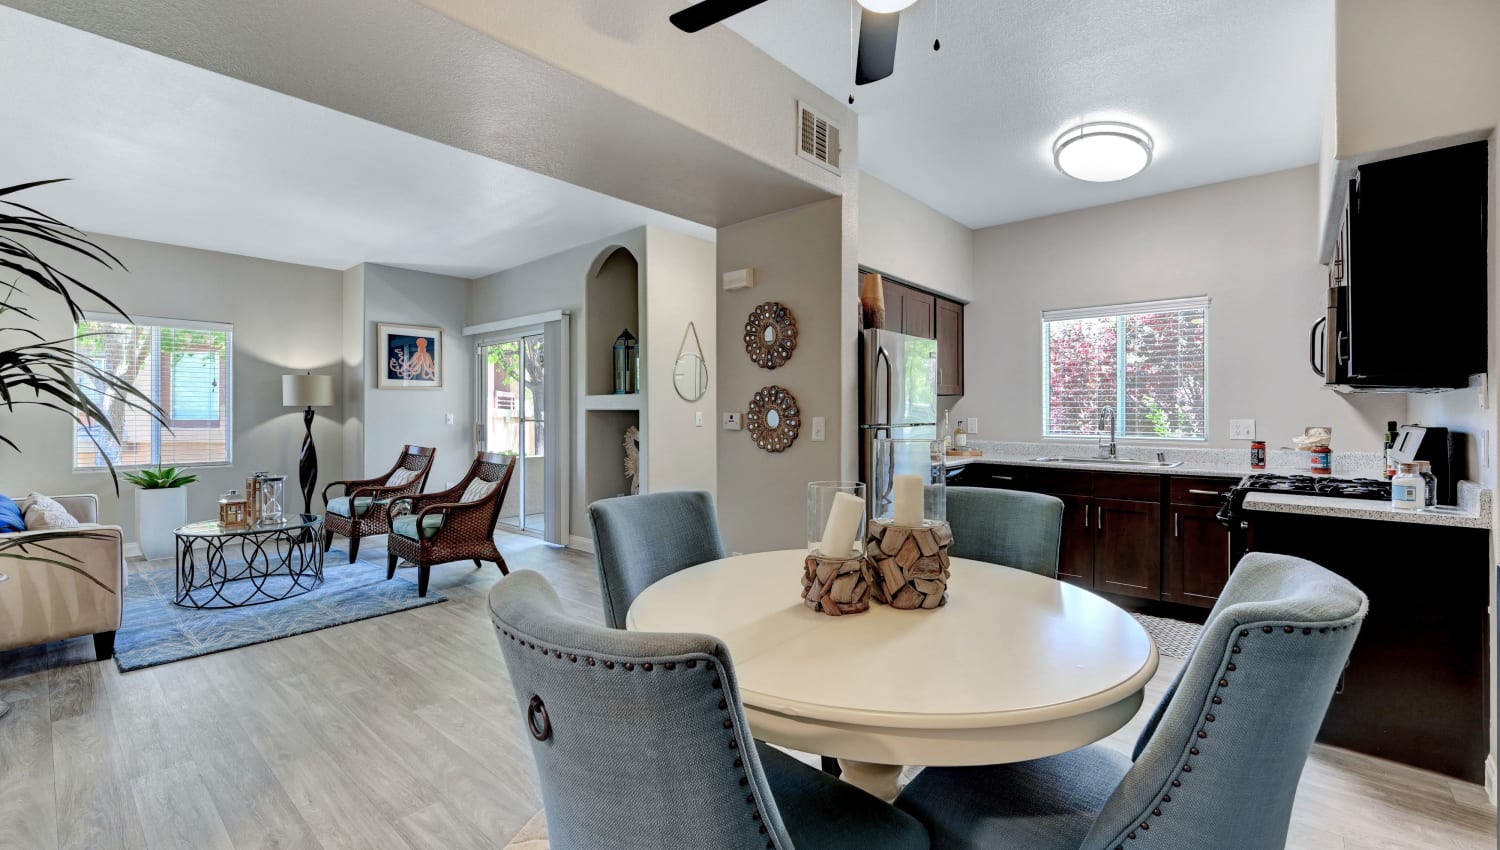 Dining area with view of kitchen and living room at Canyon Villas Apartments in Las Vegas, Nevada